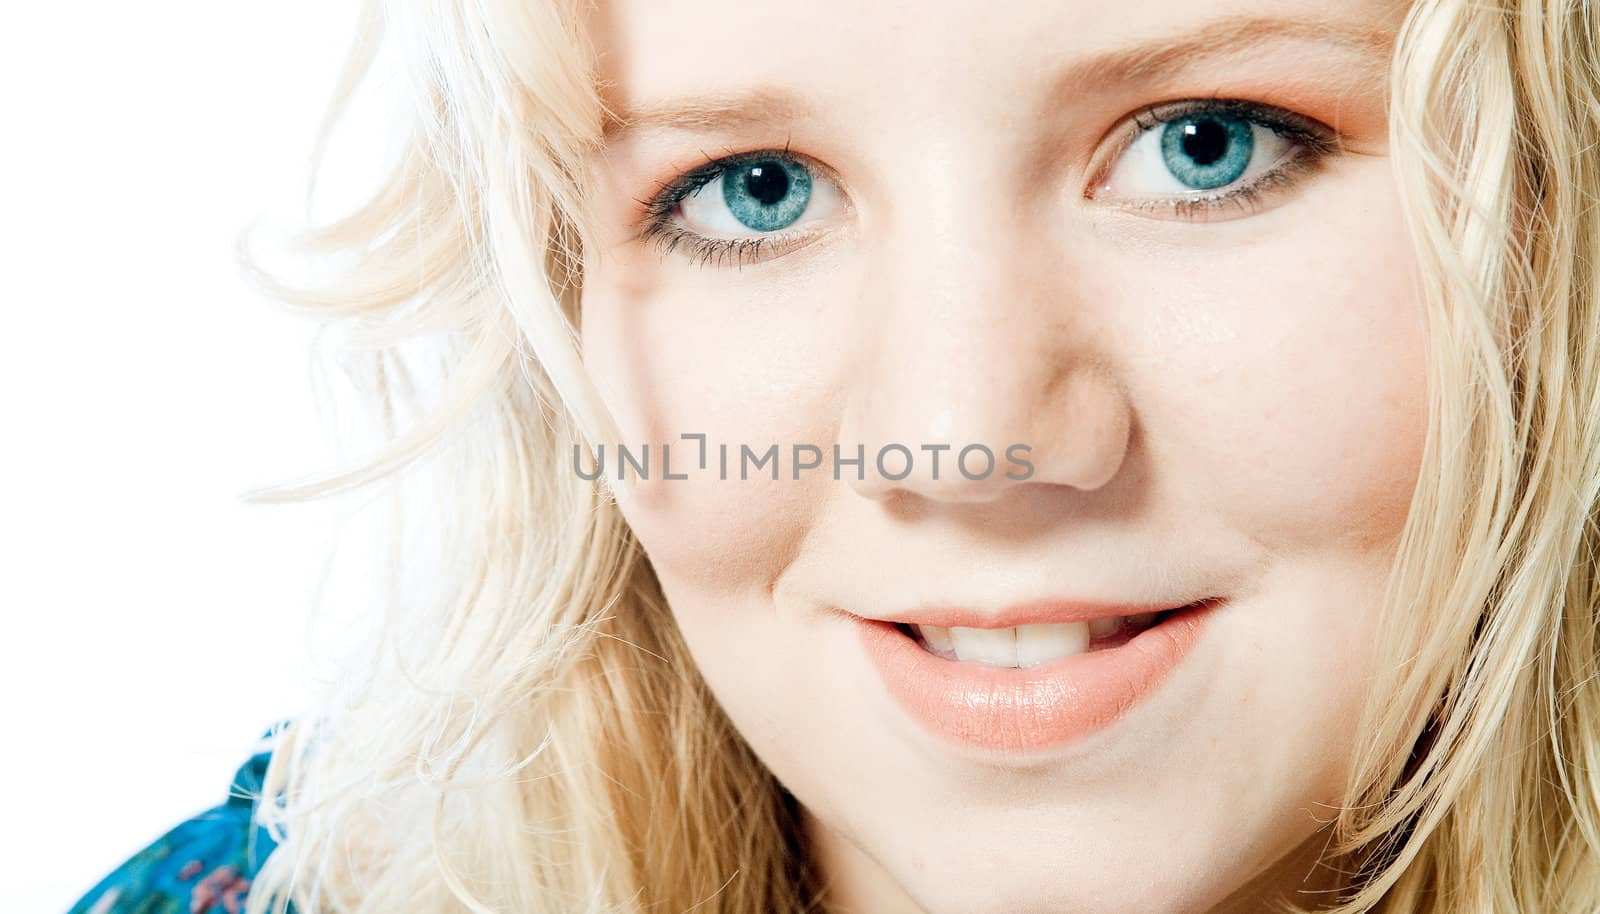 Studio portrait of a blond young lady with strong blue eyes